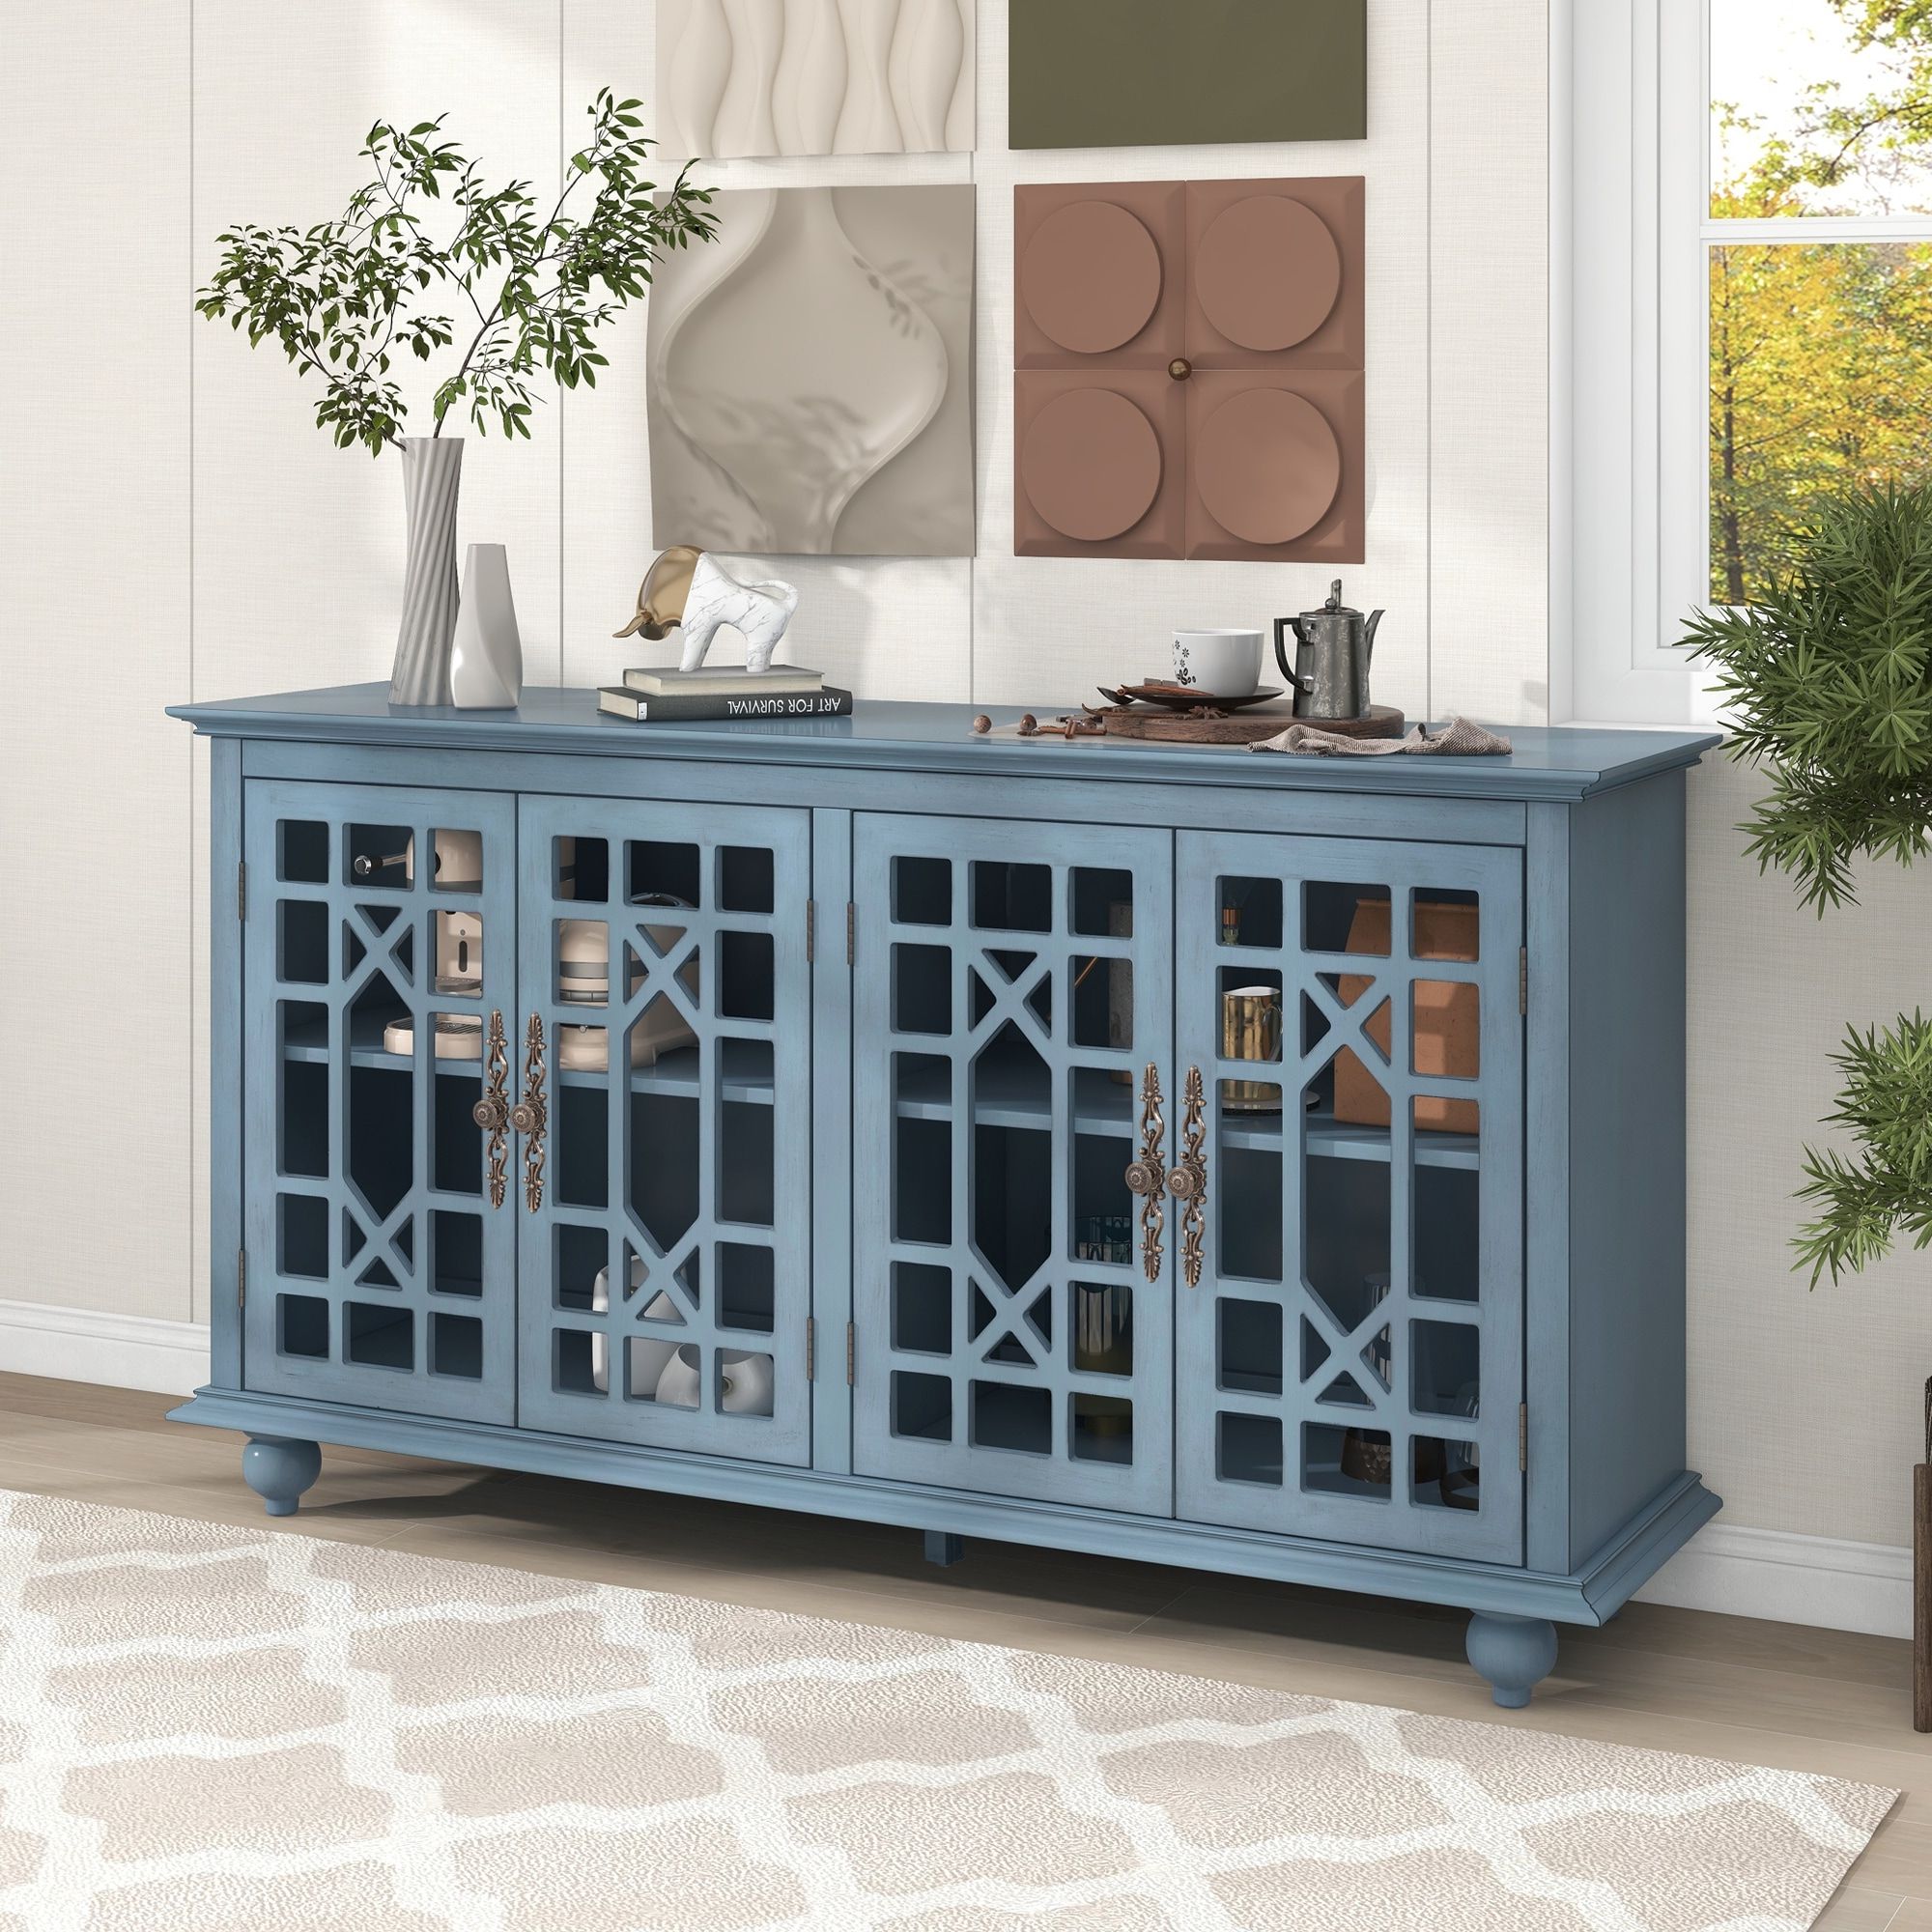 Solid Wood Sideboards With Adjustable Height Shelves, Metal Handles & 4  Glass Doors For Living Room, Bedroom And Hallway – Bed Bath & Beyond –  37685169 Inside Well Known Sideboards With Adjustable Shelves (View 14 of 15)